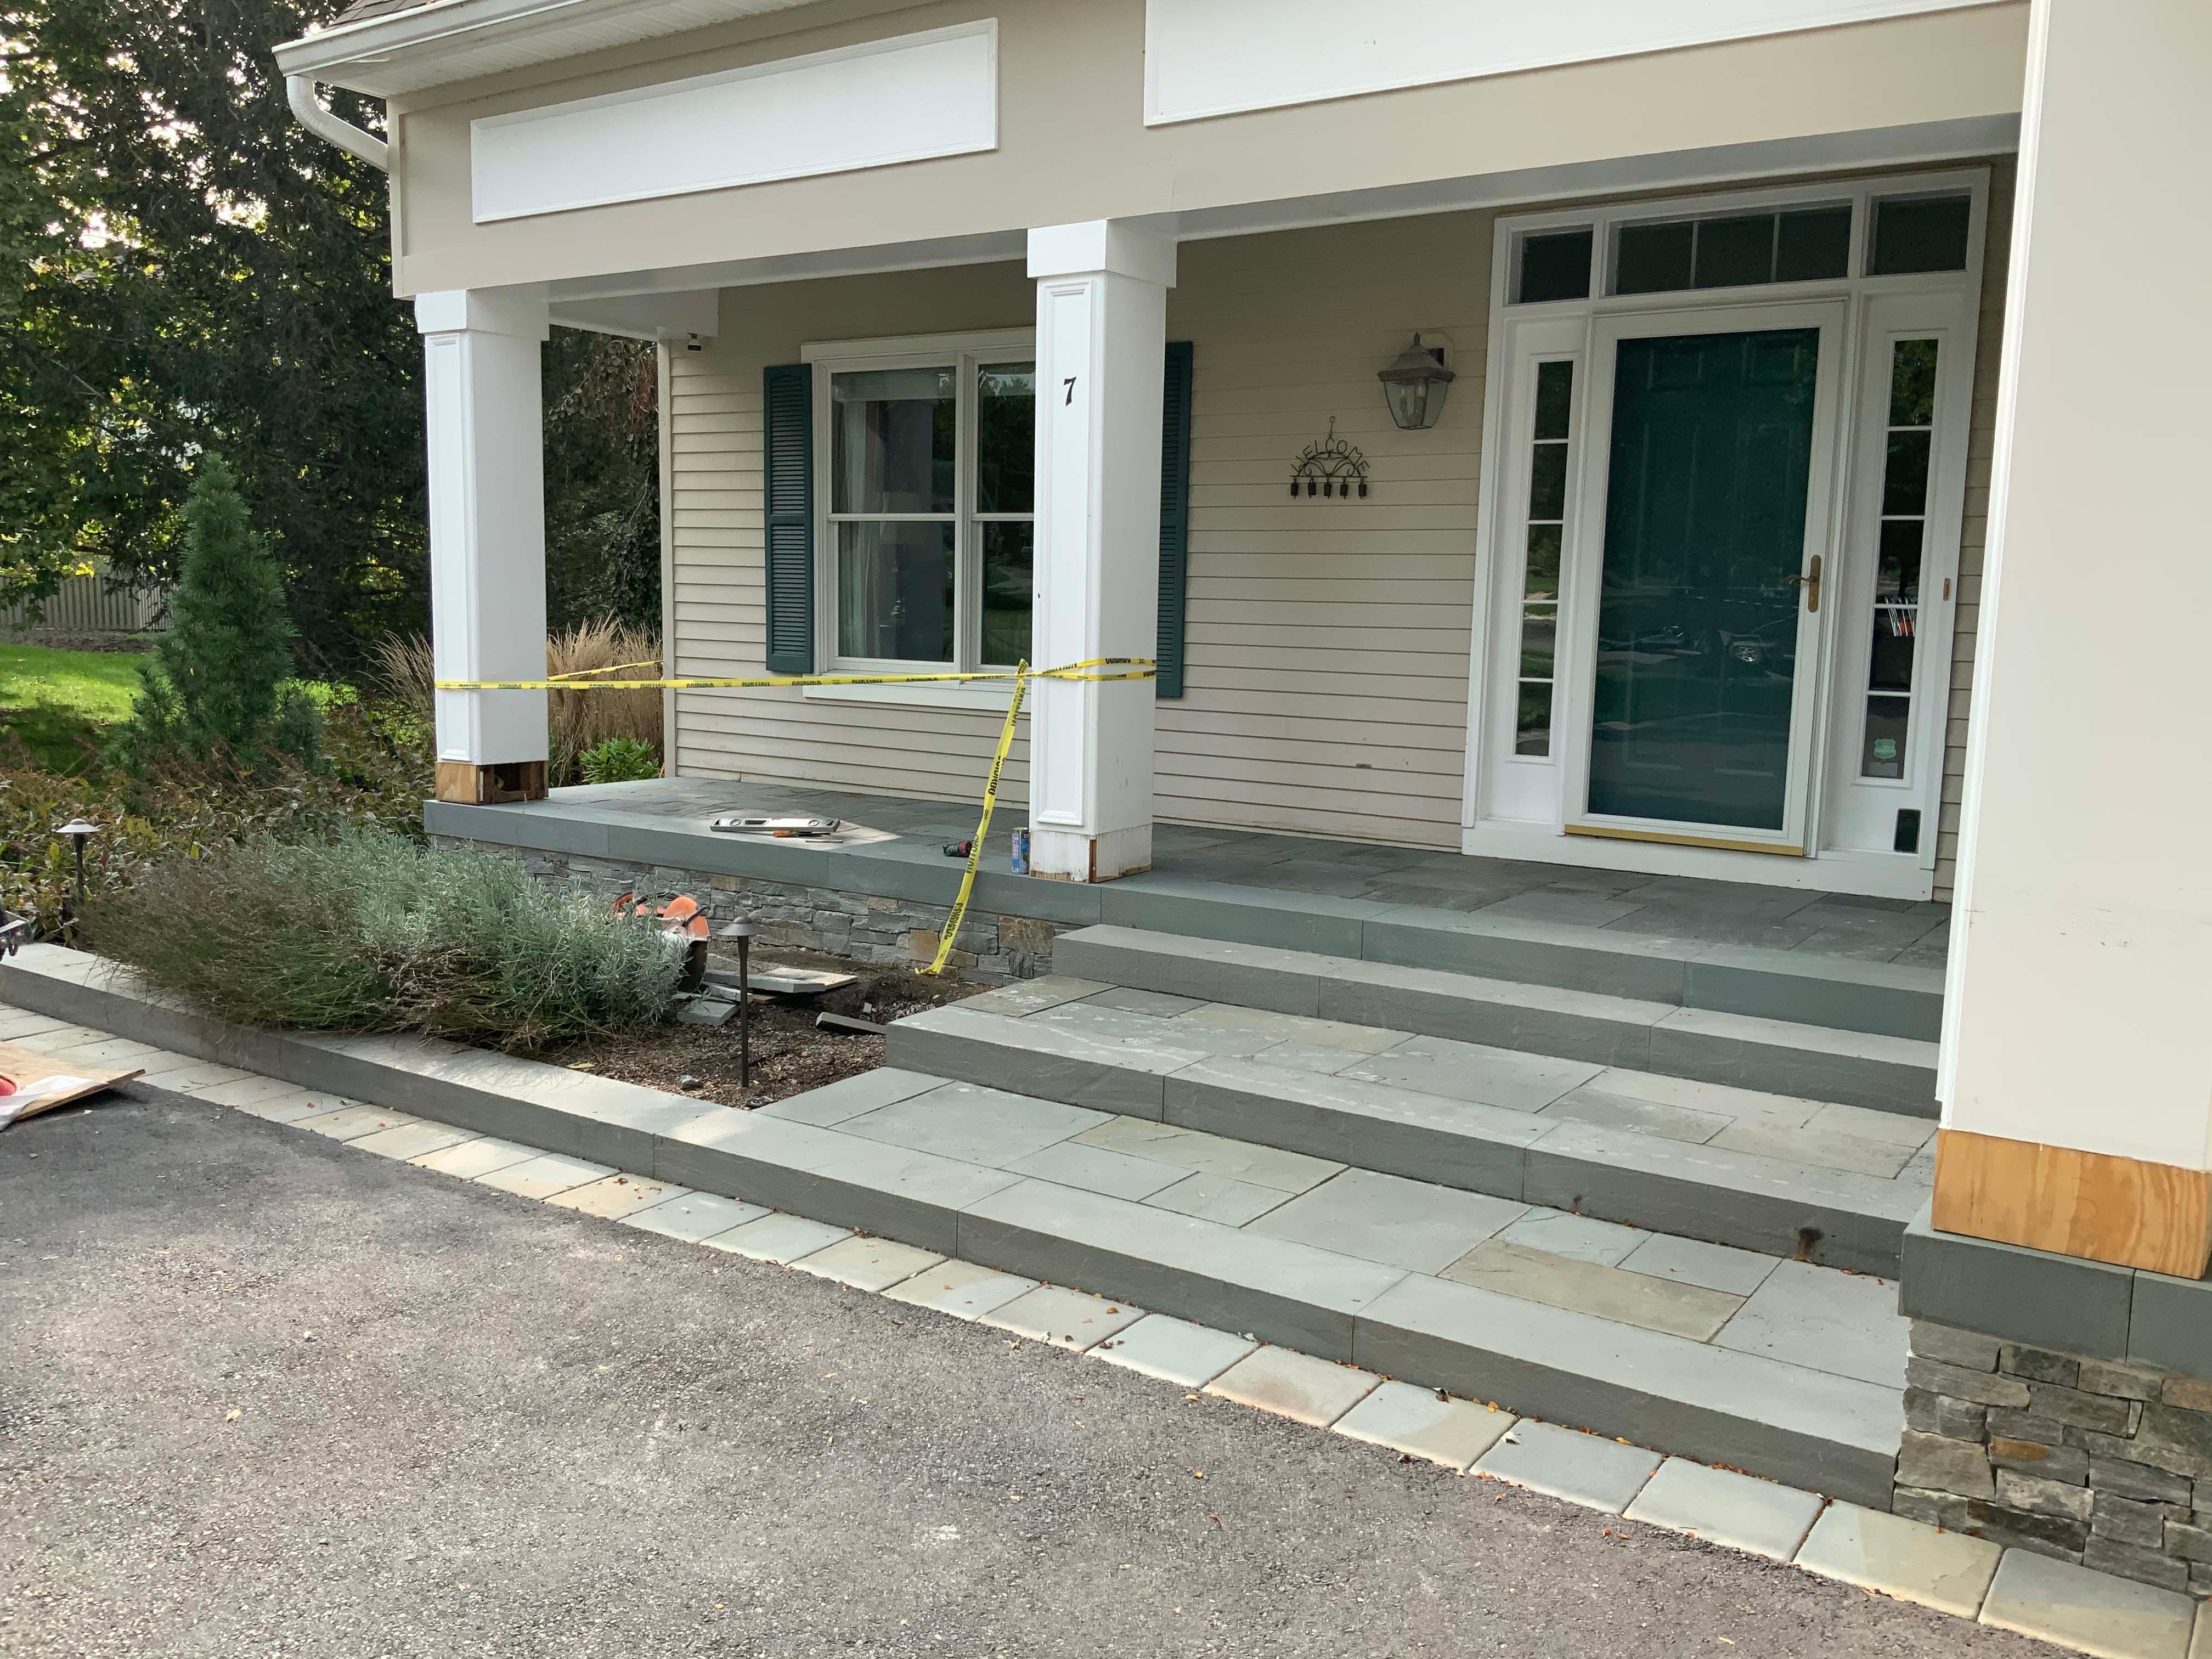 We completed this front porch last year which was the final phase of a multi-year master plan design build project.  Our clients appreciation for the outdoors and what we have created for him and his family is expressed in his smile!  On a couple occasions we have had the opportunity to enjoy the bar and fire feature with our client!  www.gardenartisansllc.com